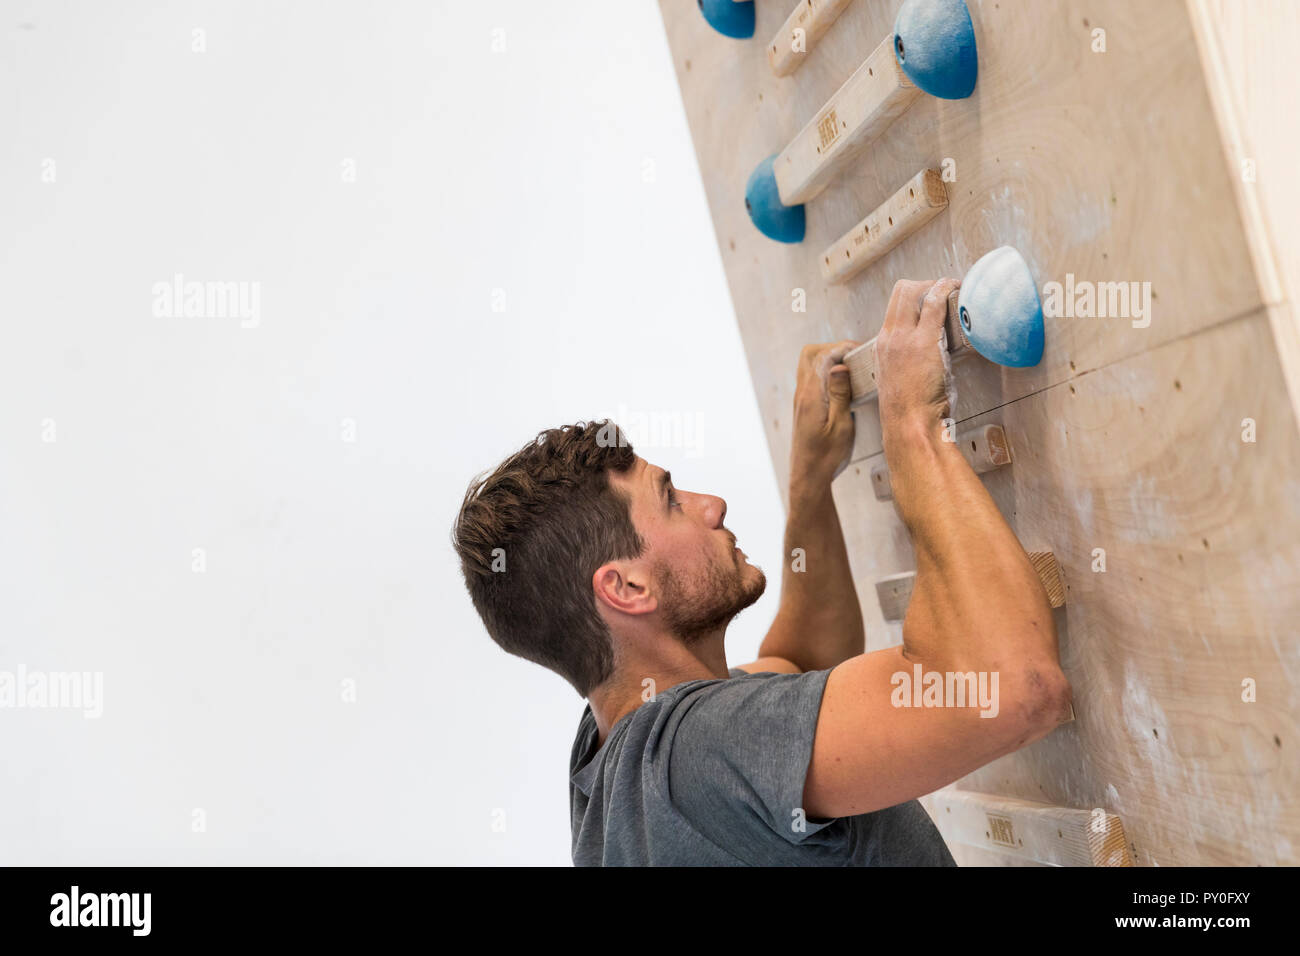 Strong man training on wooden rail in rock climbing gym against white wall, Oahu, Hawaii, USA Stock Photo